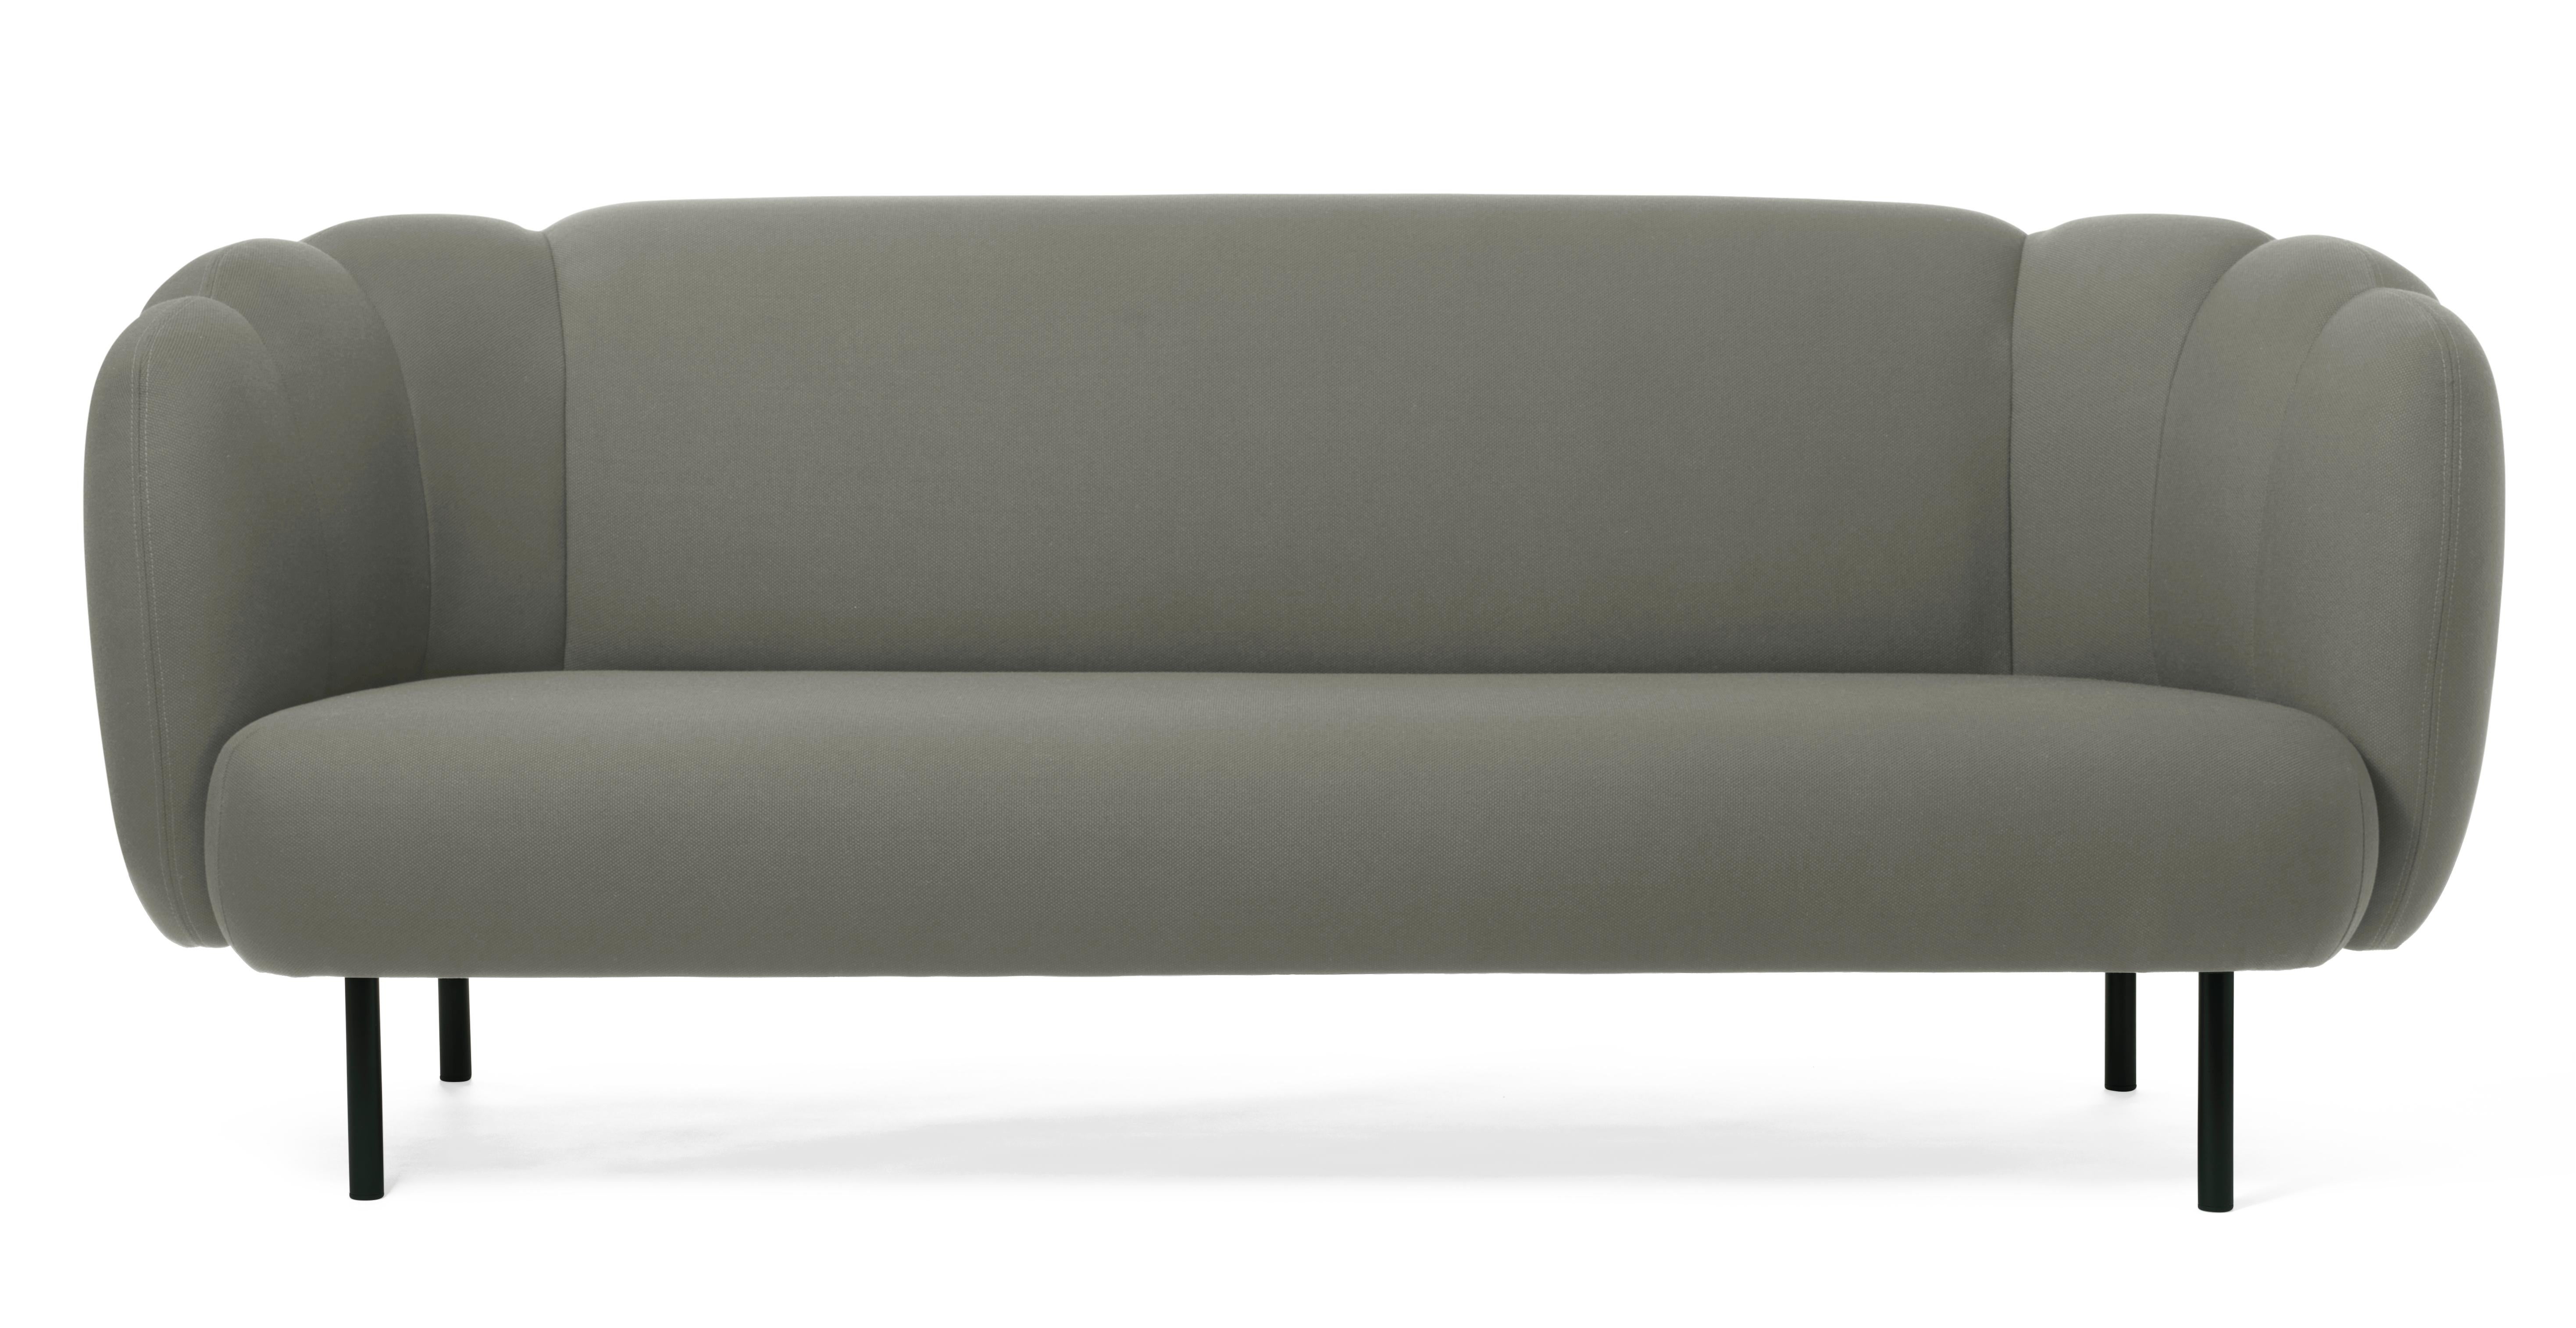 For Sale: Gray (Steelcut 160) Cape 3-Seat Stitch Sofa, by Charlotte Høncke from Warm Nordic